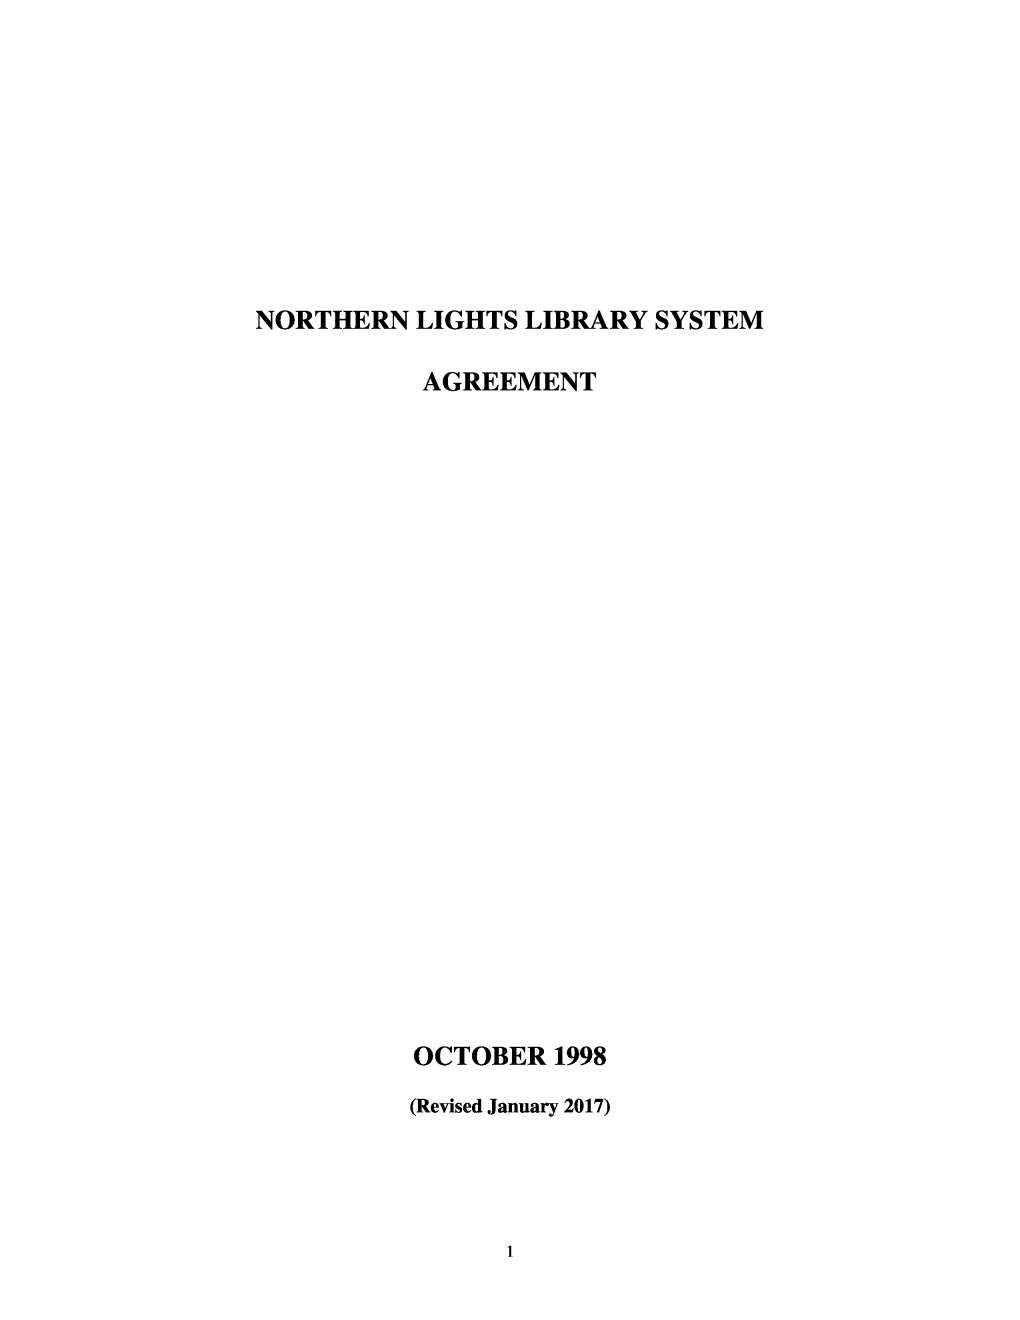 Northern Lights Library System Agreement October 1998